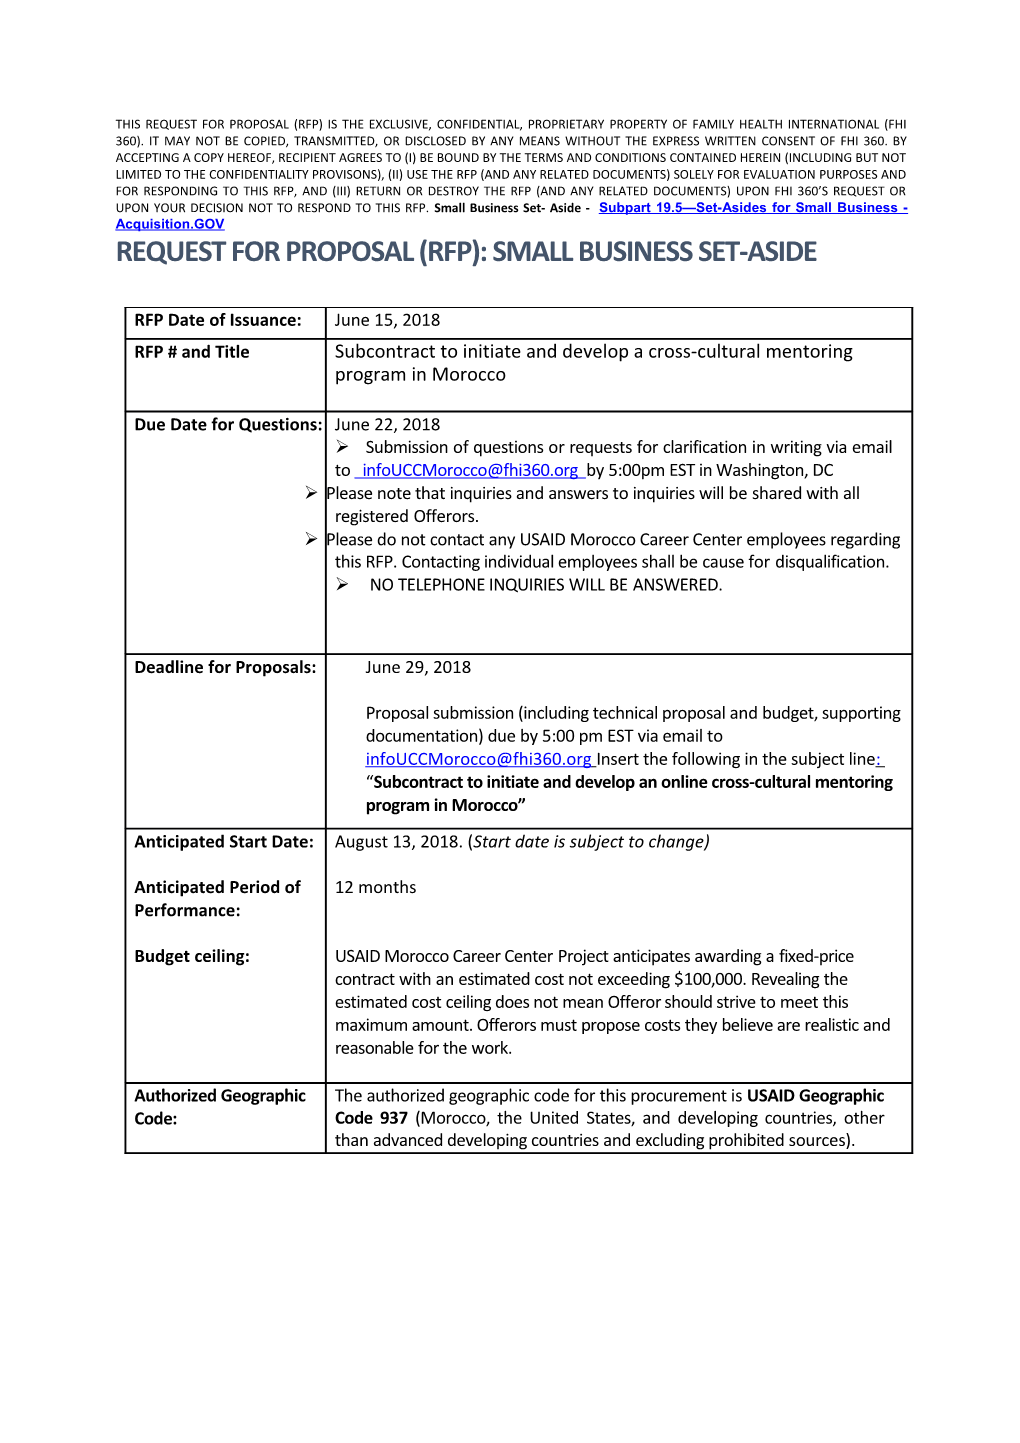 Request for Proposal (RFP): SMALL BUSINESS SET-ASIDE